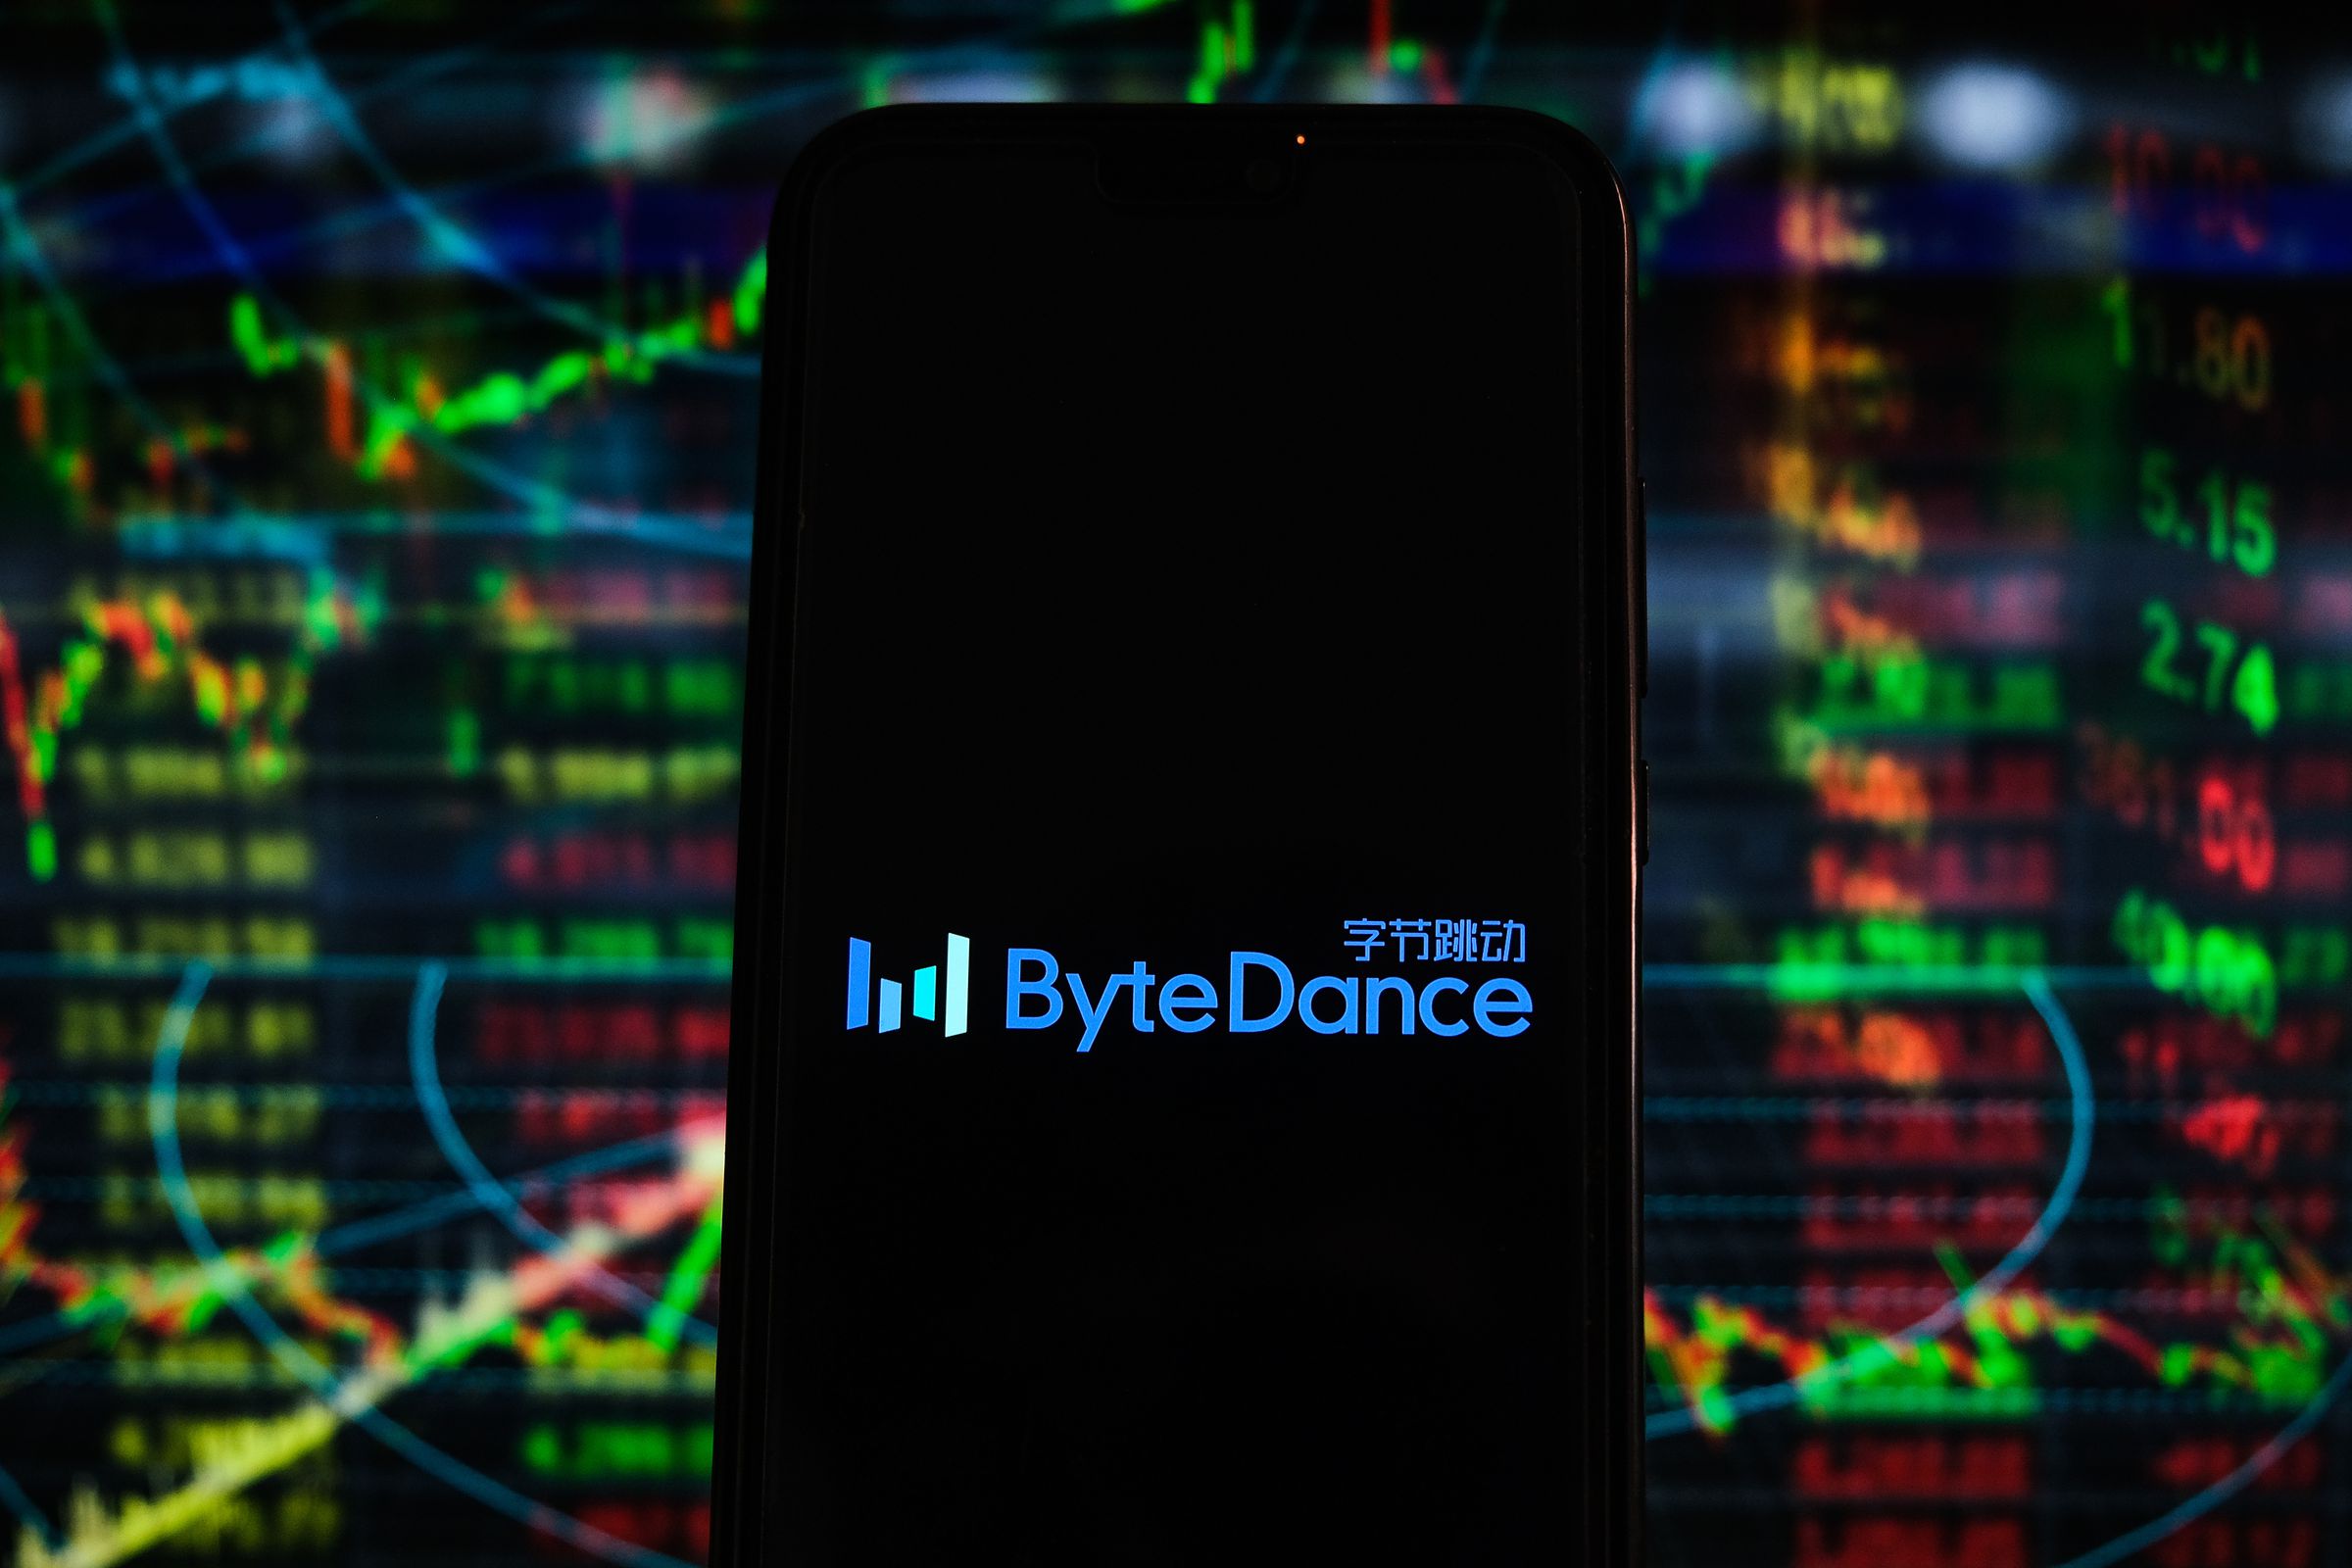 ByteDance, parent company of TikTok, may put its IPO on hold indefinitely